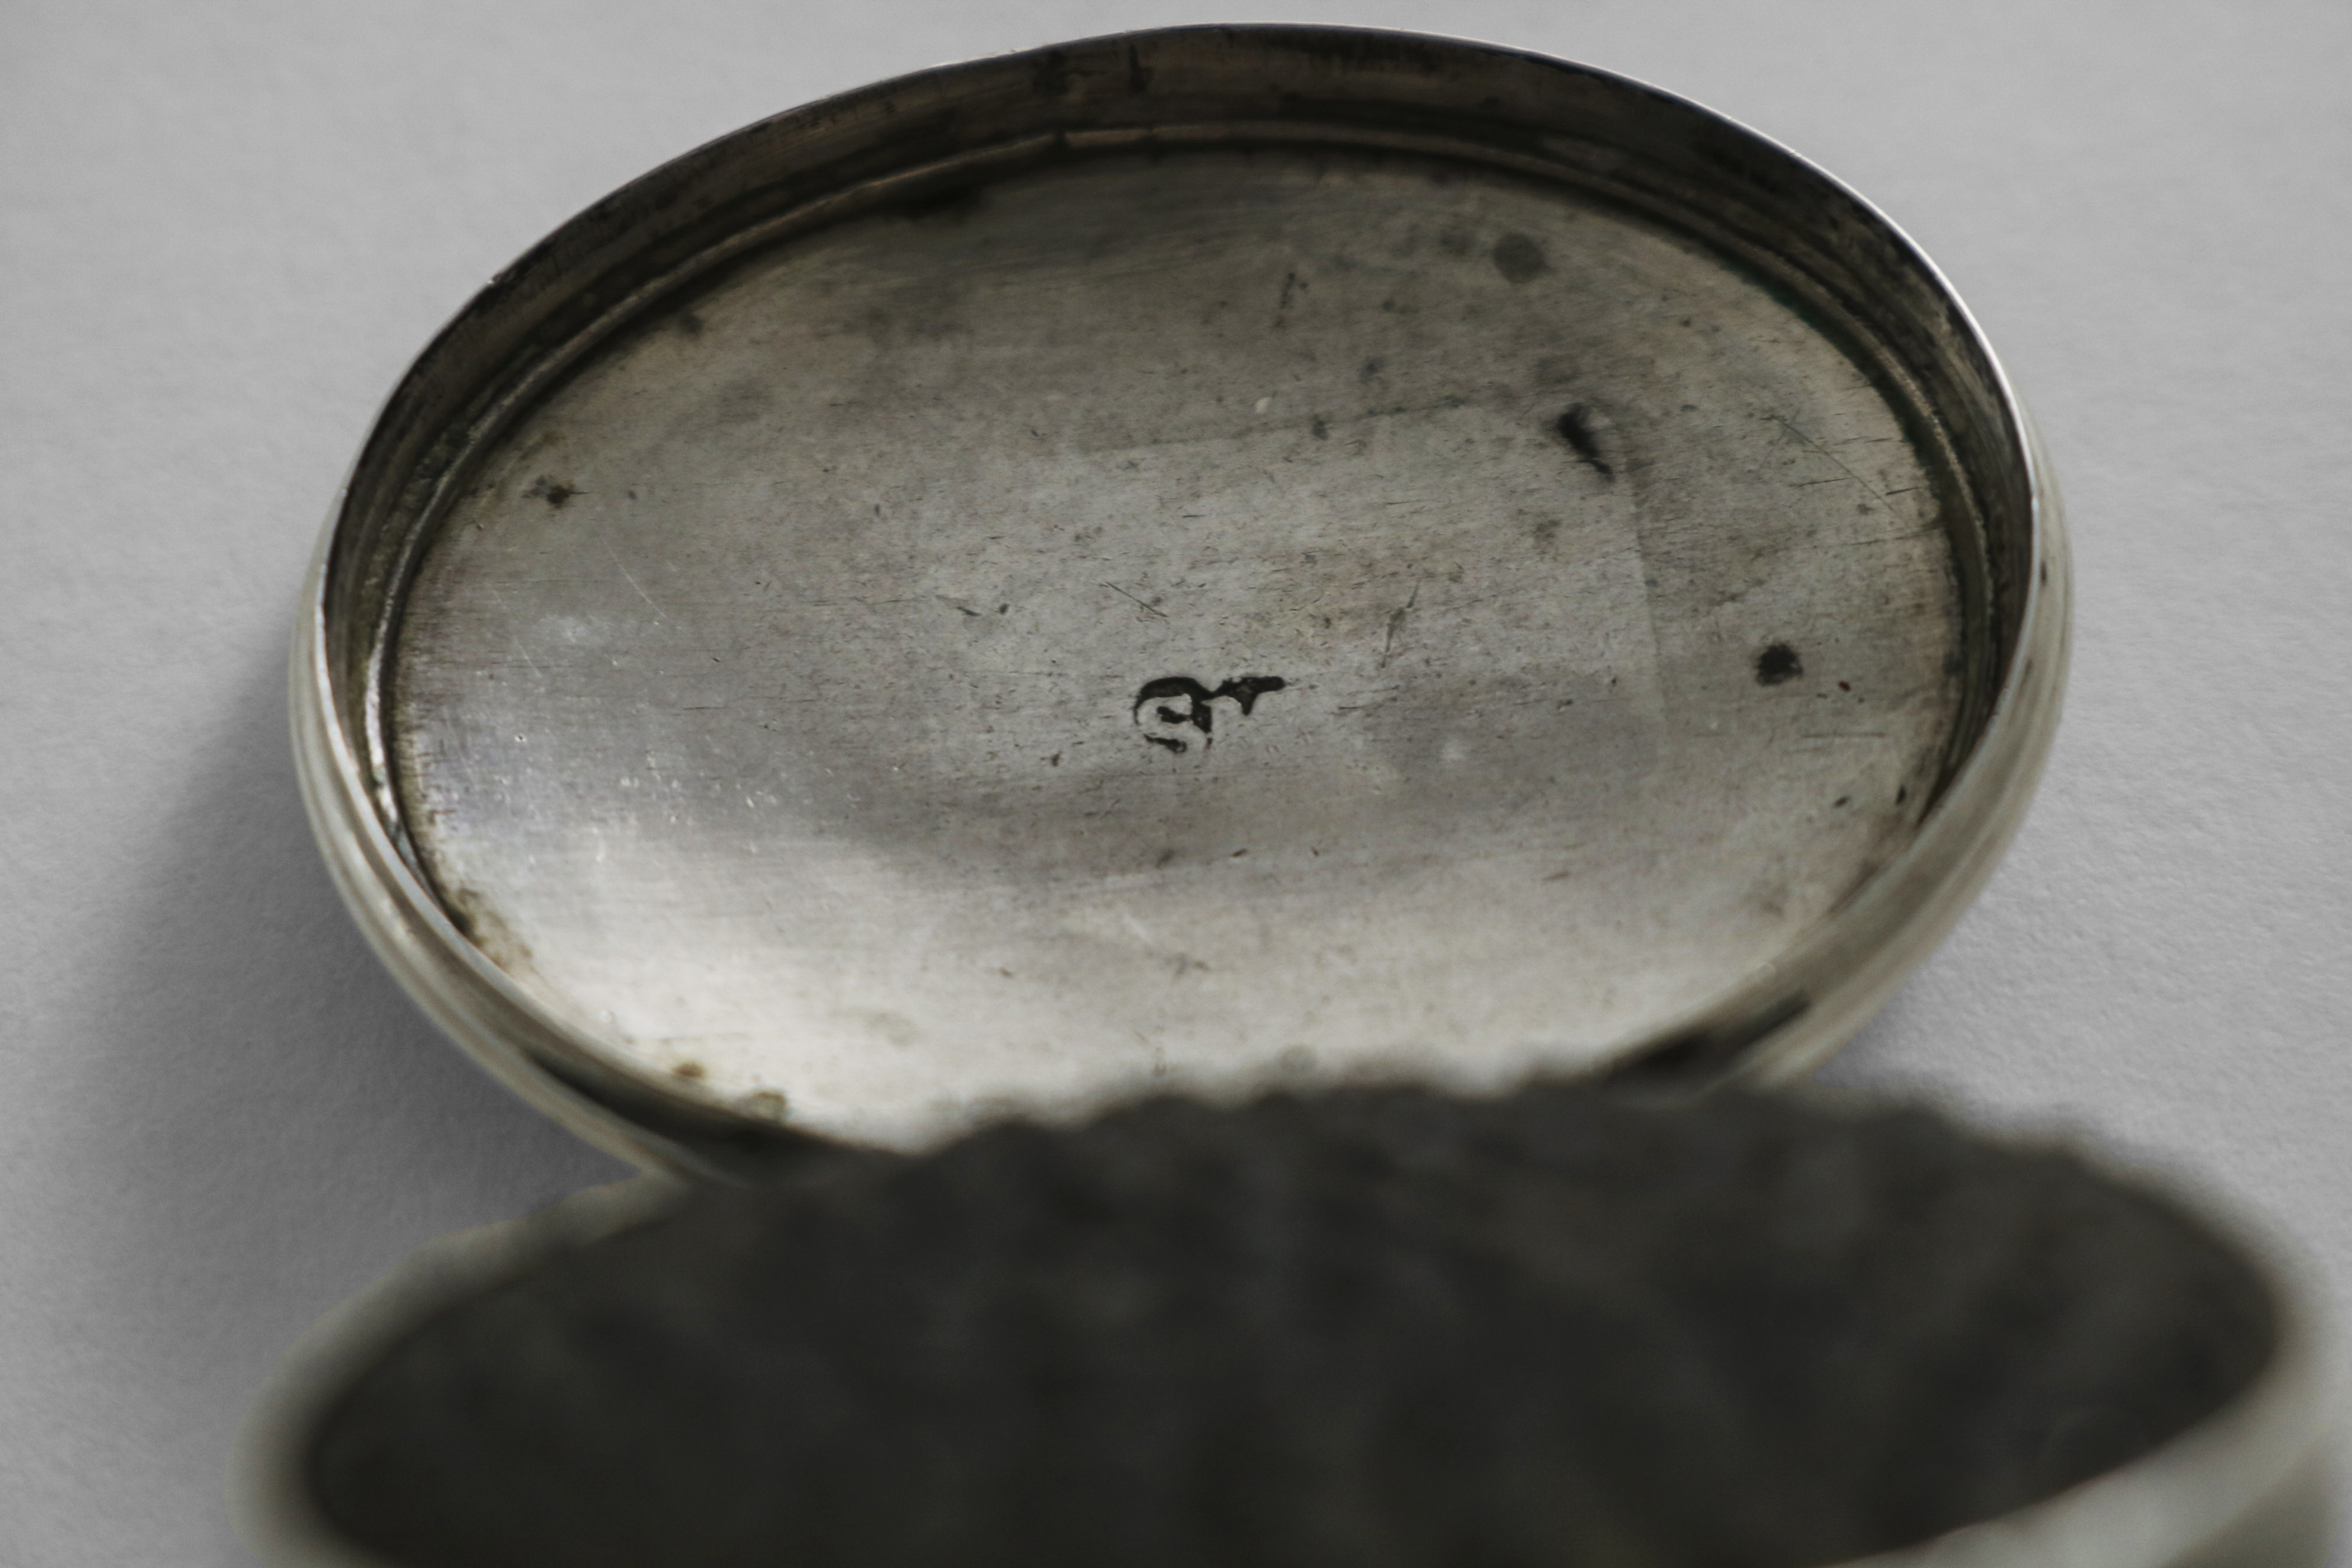 A GEORGE III IRISH NUTMEG GRATER oval with moulded borders, a hinged cover and base and a domed - Image 2 of 2